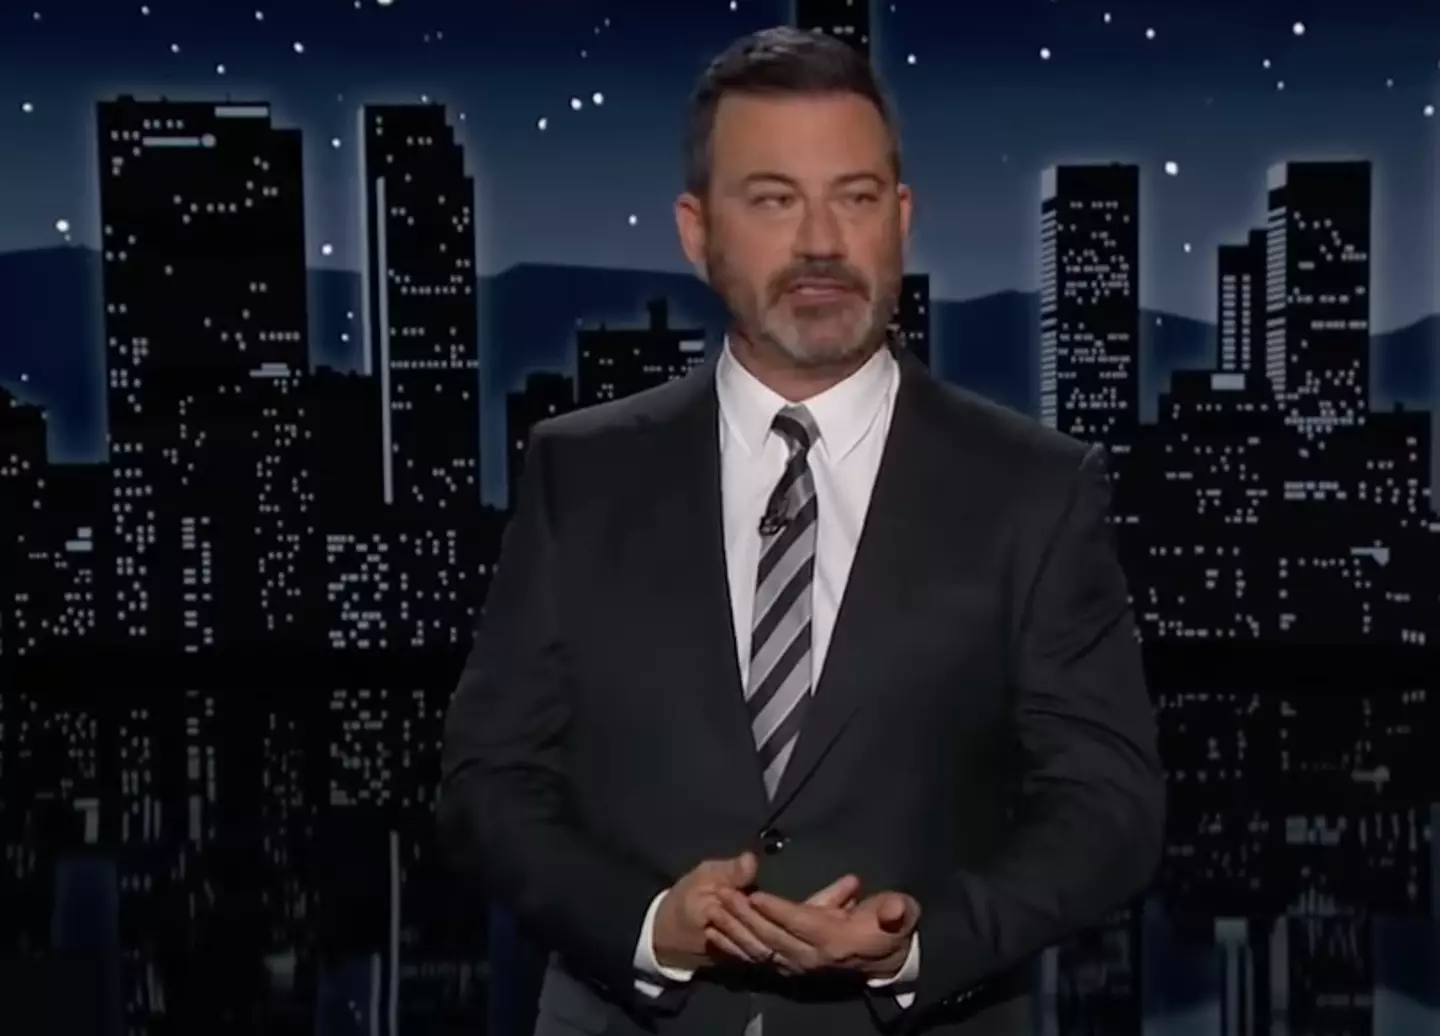 Kimmel responded to Rodgers' claims by threatening legal action.